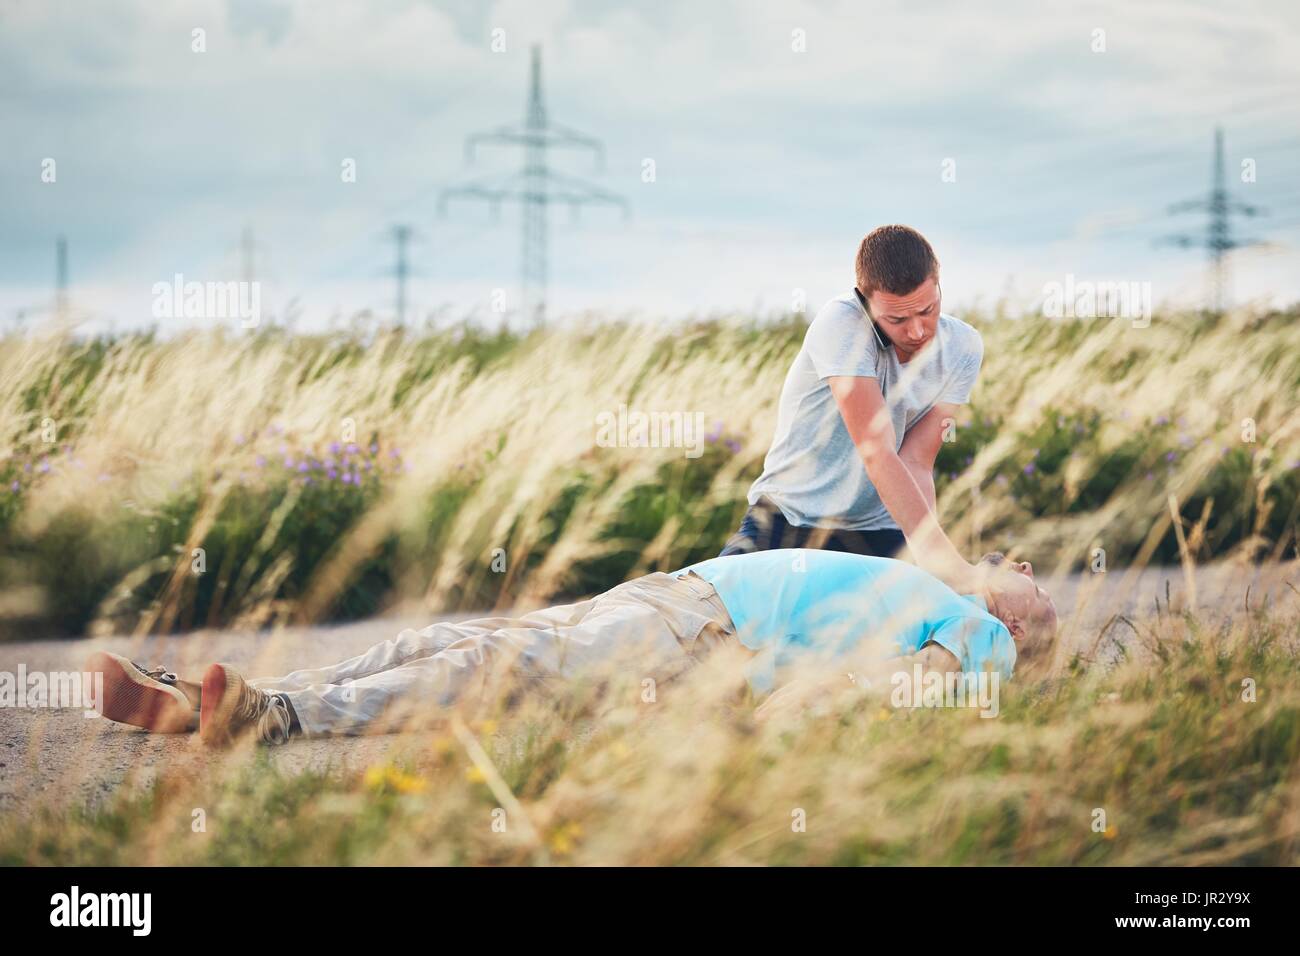 Young man calling for Emergency medical service. Dramatic resuscitation on the rural road. Themes rescue, help and hope. Stock Photo